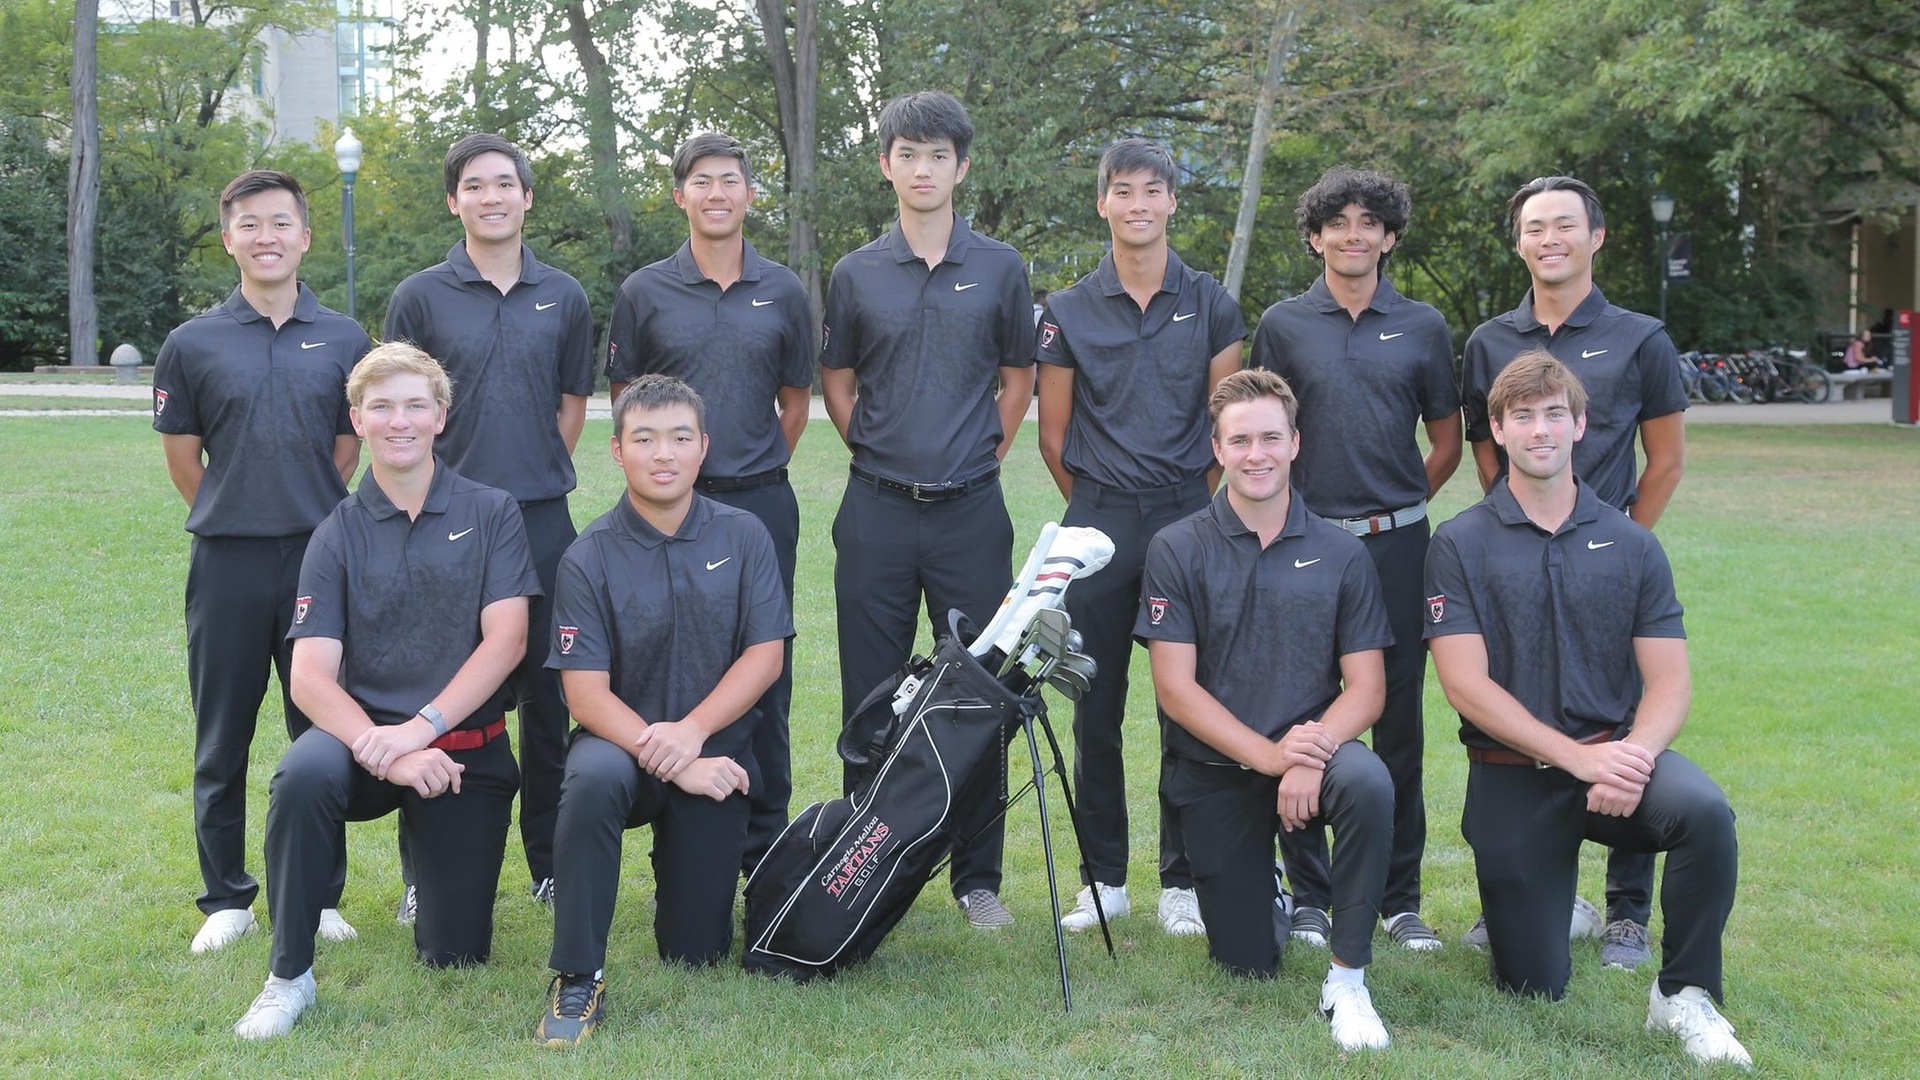 men's golf team photo with players wearing black shirts and black pants with one row kneeling and one row standing